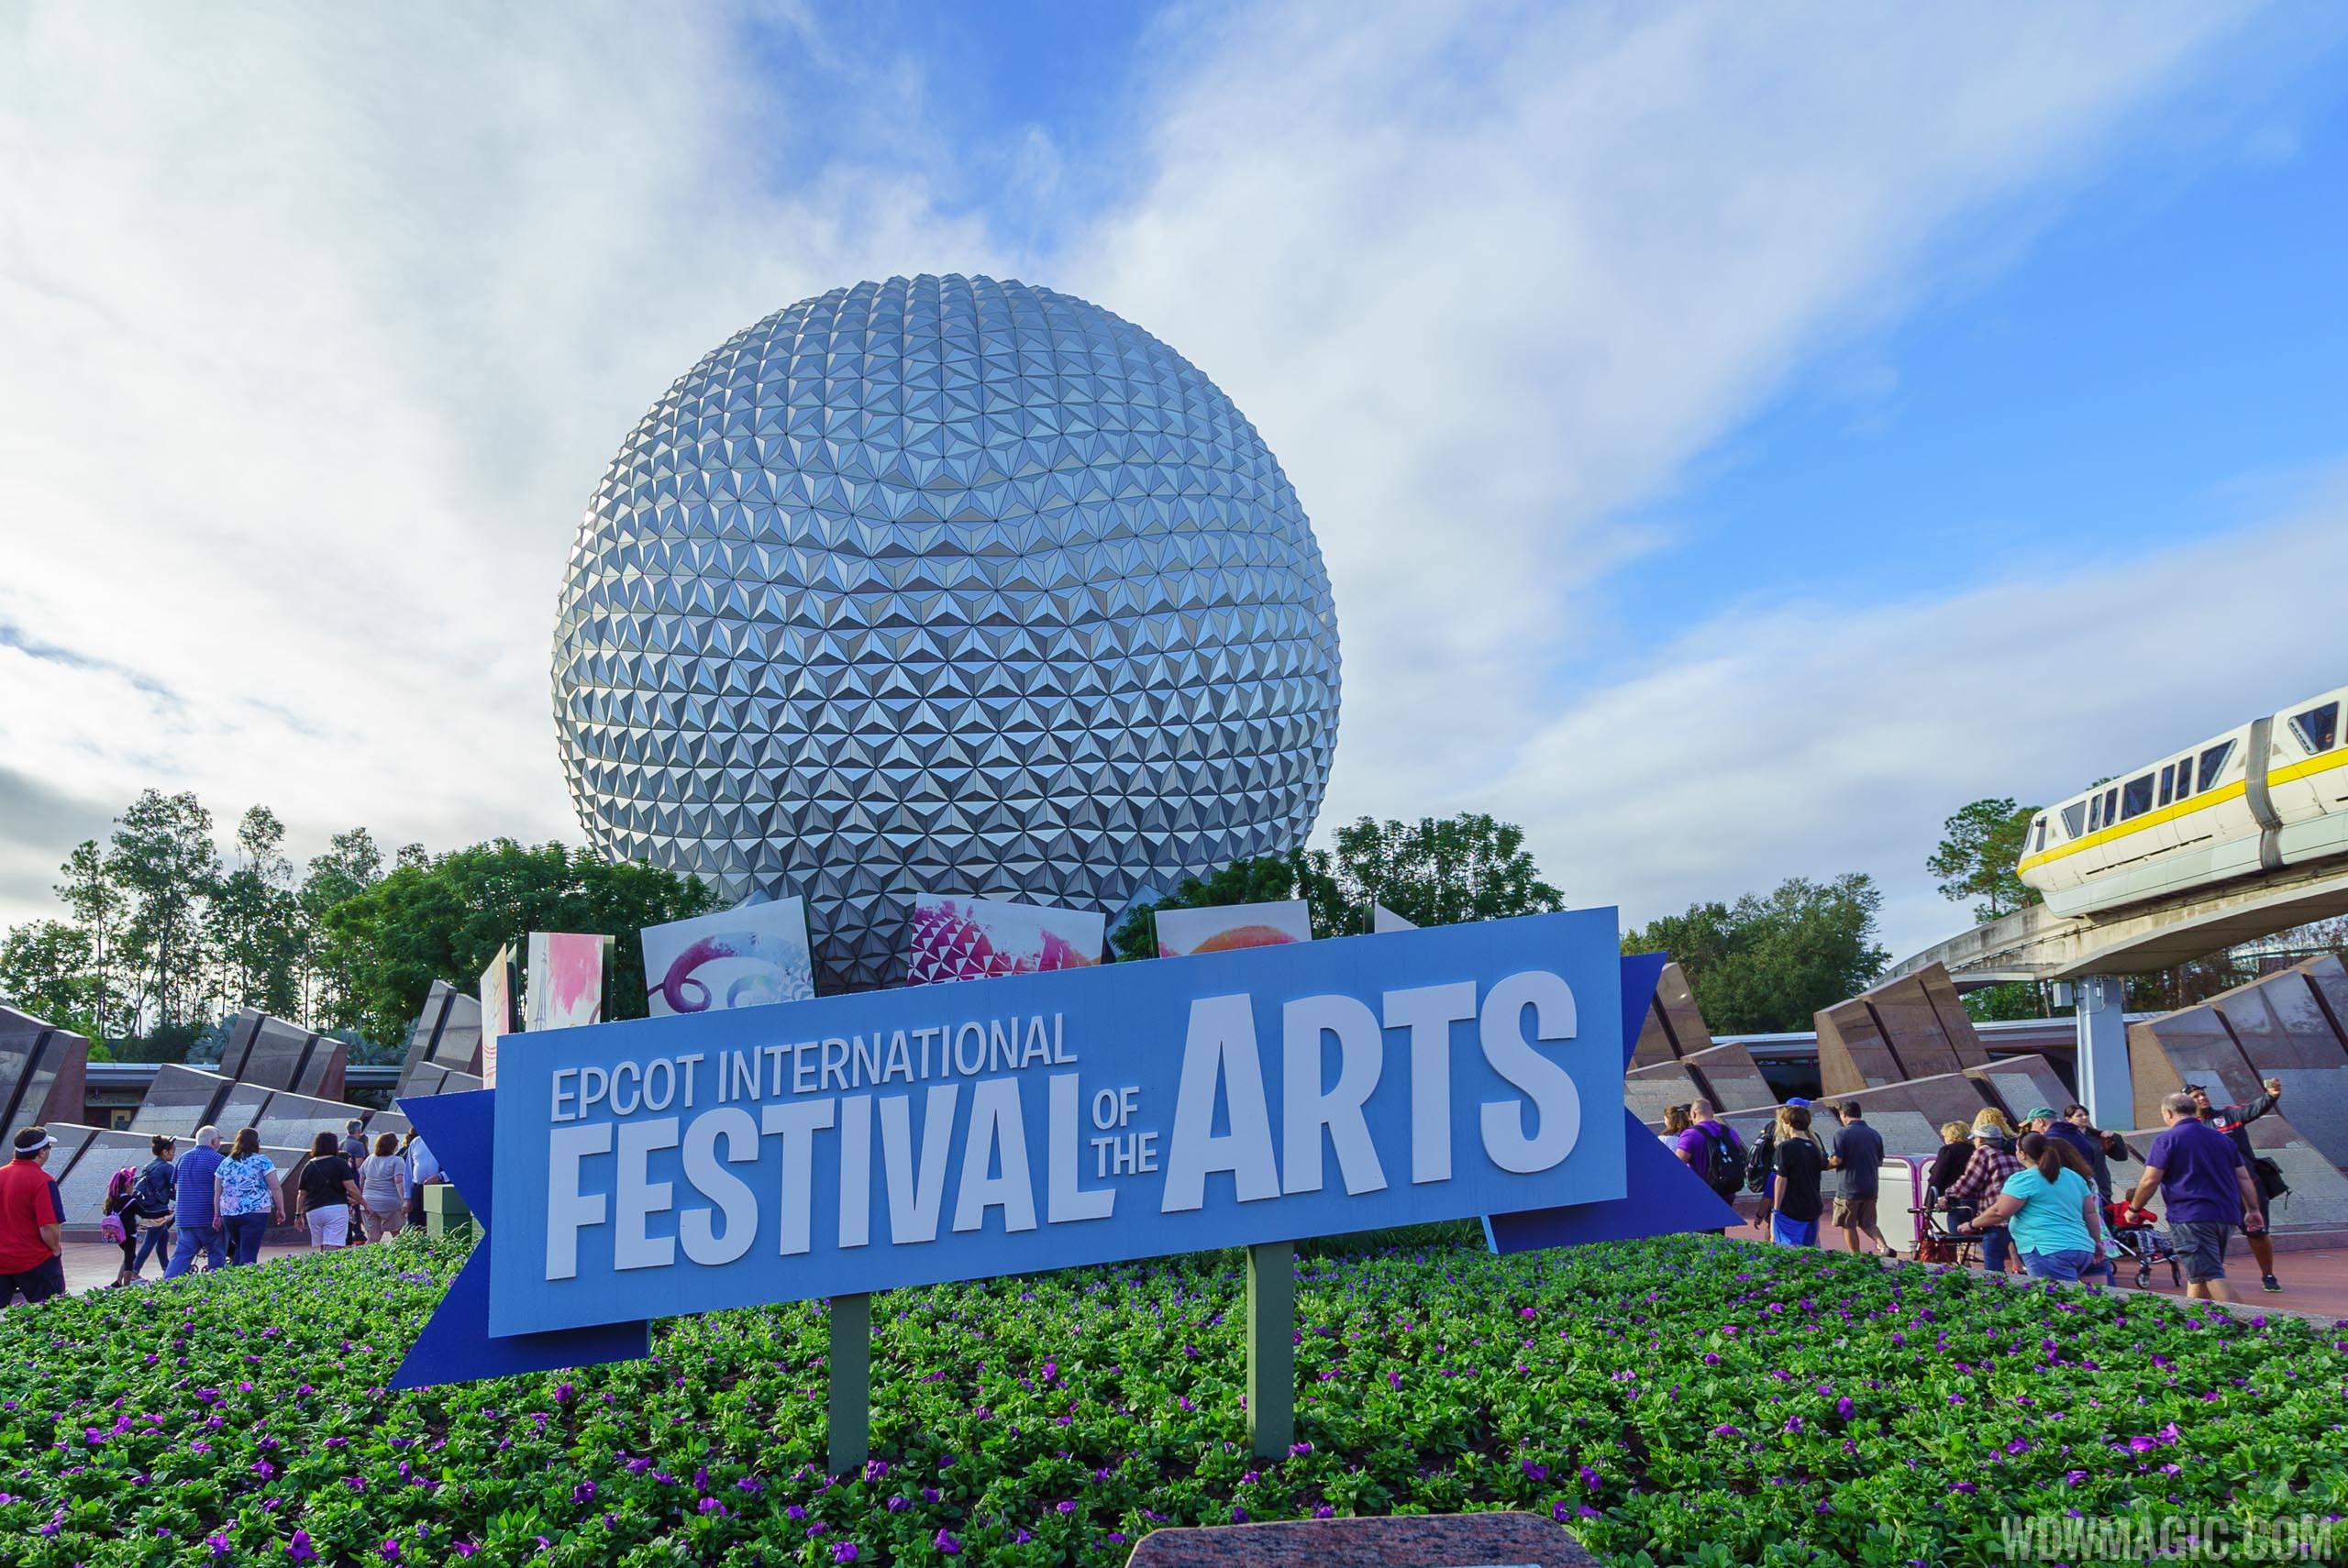 Everything on offer at the 2022 EPCOT International Festival of the Arts